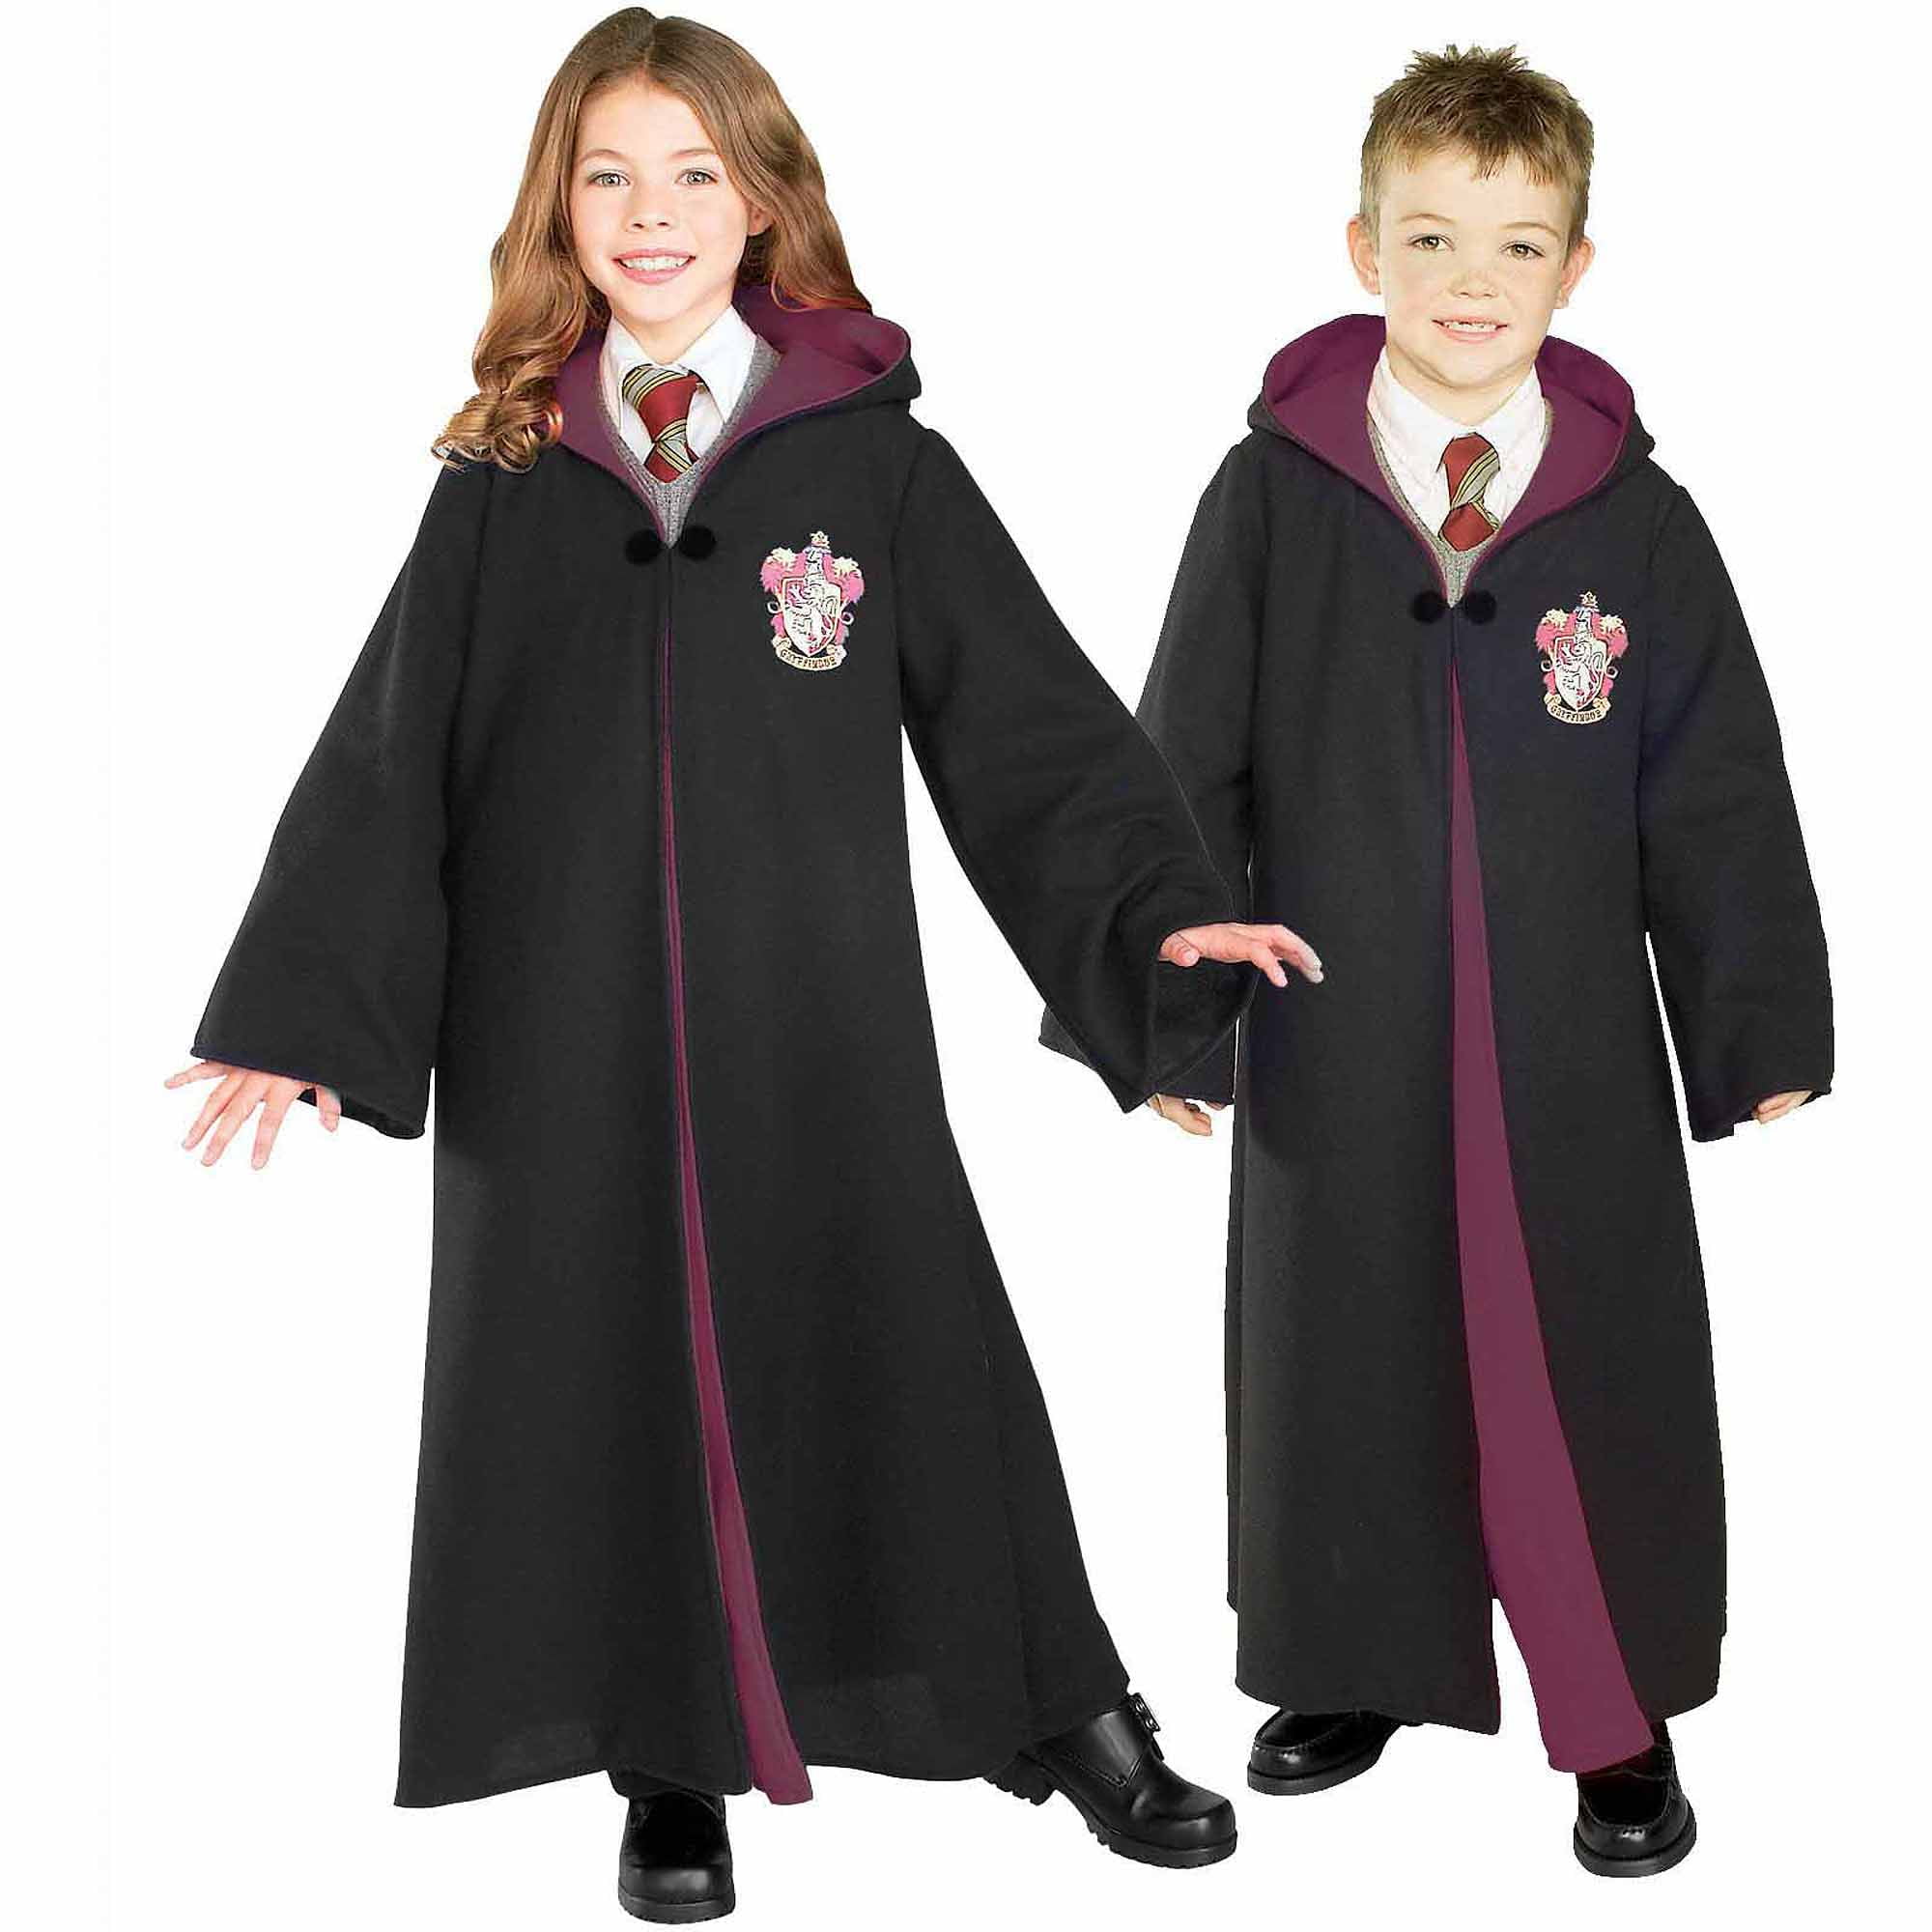  Rubie's Harry Potter Child's Ravenclaw Robe - One Color -  Large, Black : Clothing, Shoes & Jewelry